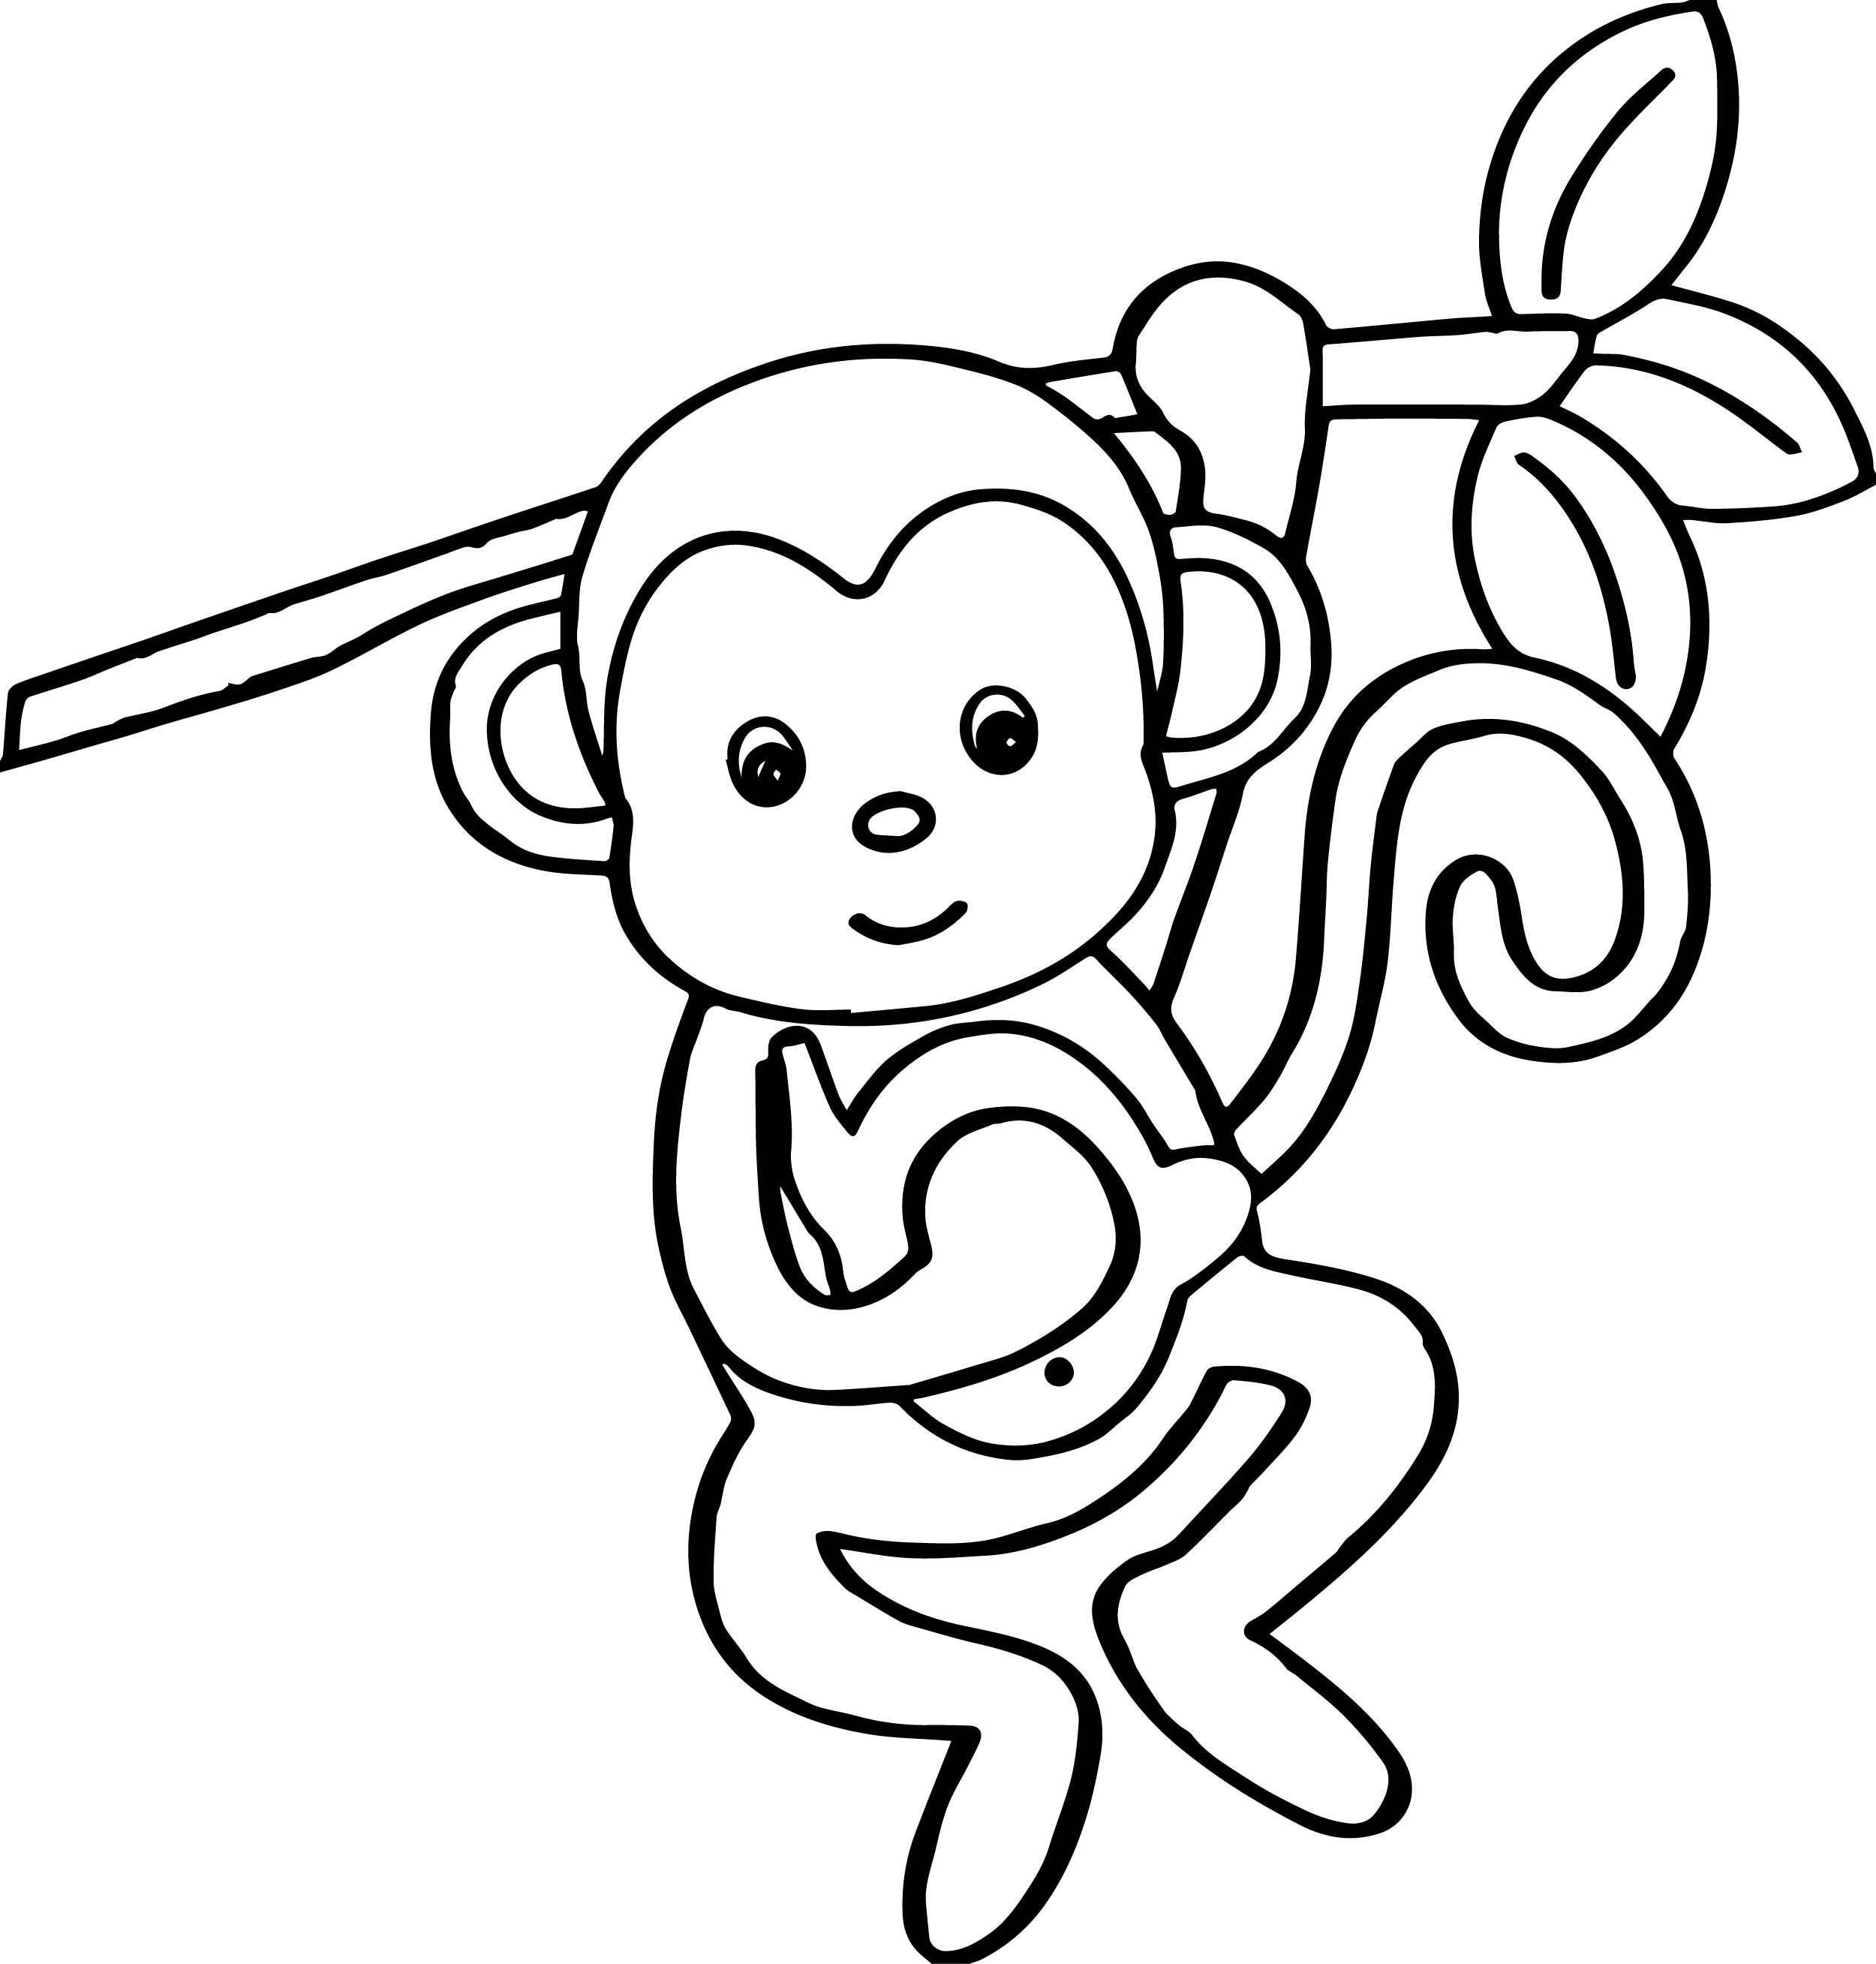 Coloring Book Pages Monkey
 Cartoon Animals Kids Monkey Coloring Page